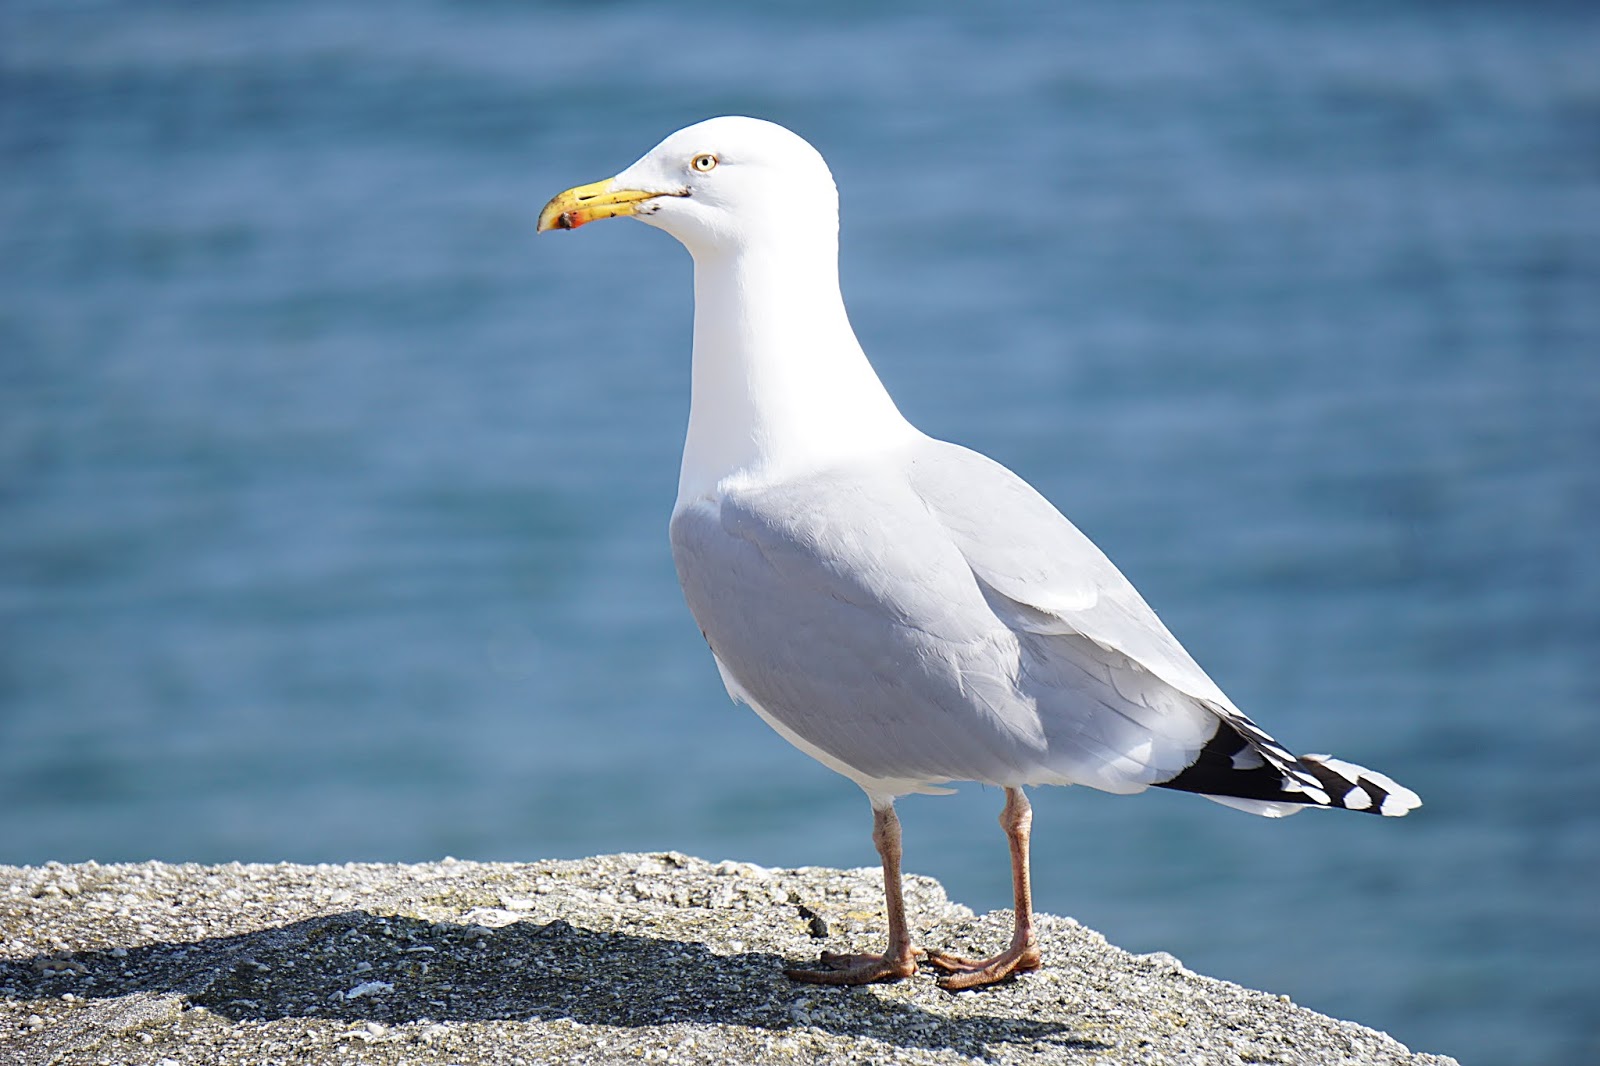 Seagulls: How the Wurst Was Won